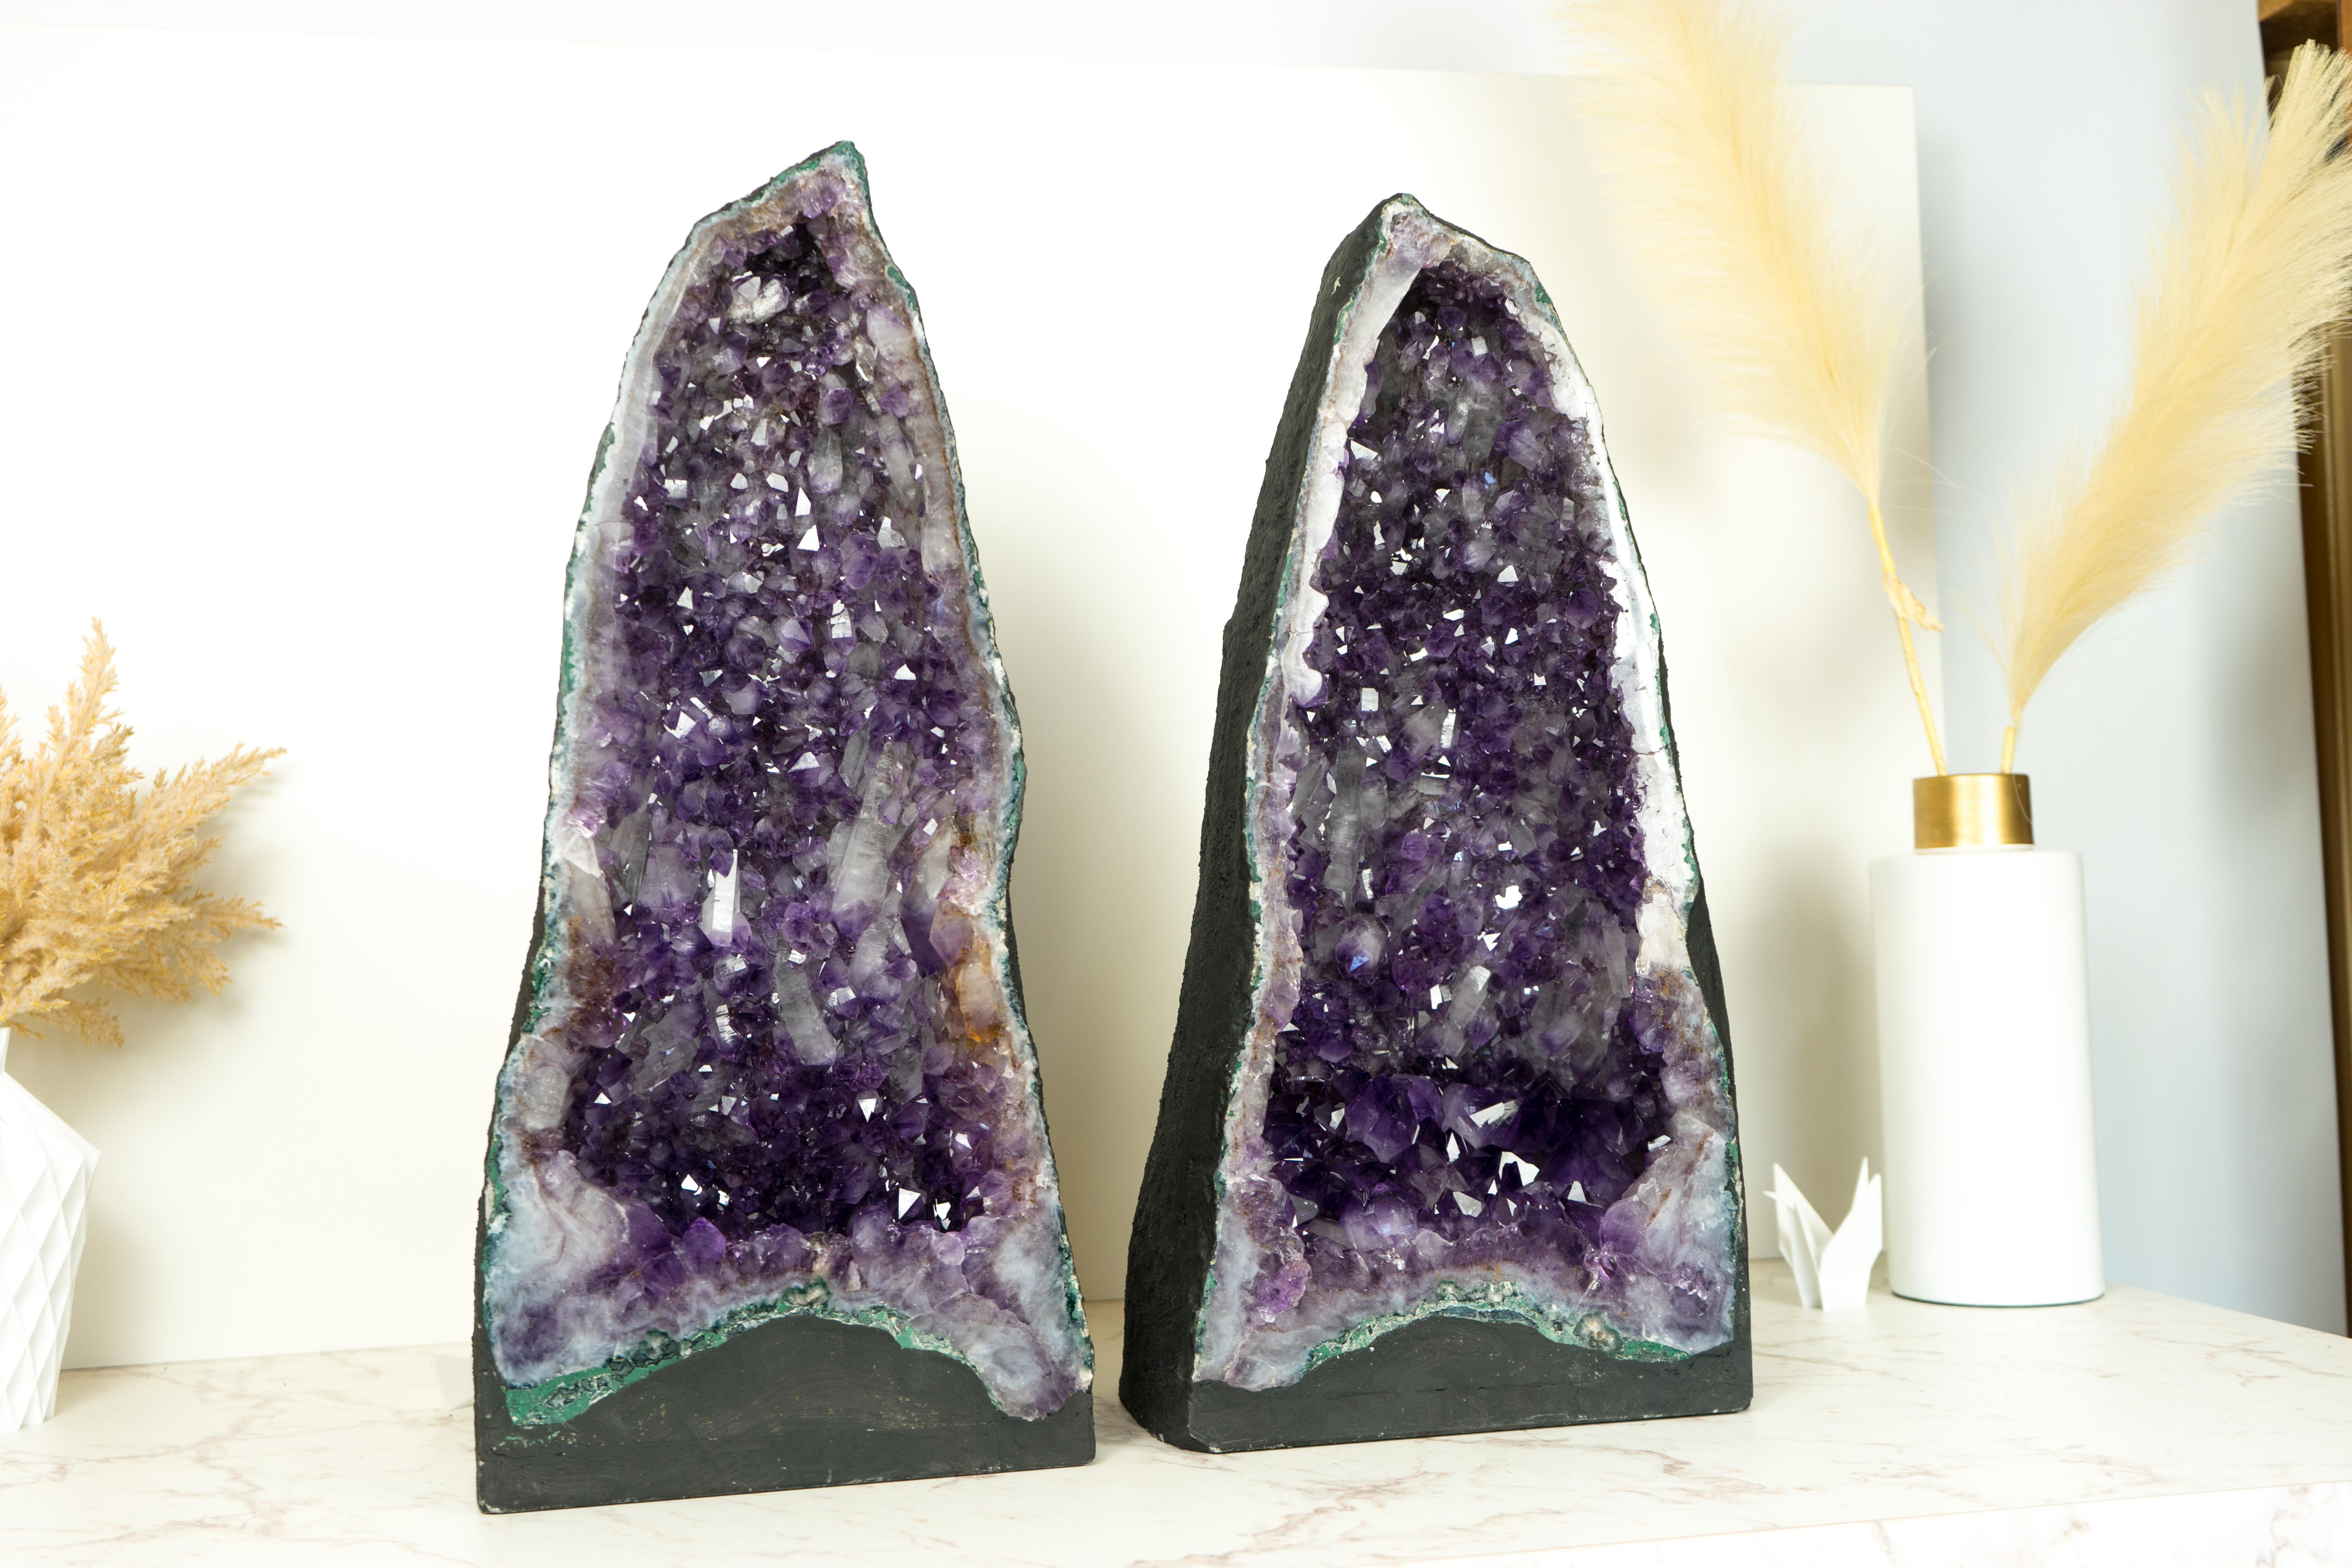 With its many qualities, including the rare Amethyst Druzy and its beautiful formation, this pair of magnificent Amethyst Geode Cathedrals is sure to add a pop of violet-purple color and a calming, peaceful atmosphere to your decor or crystal